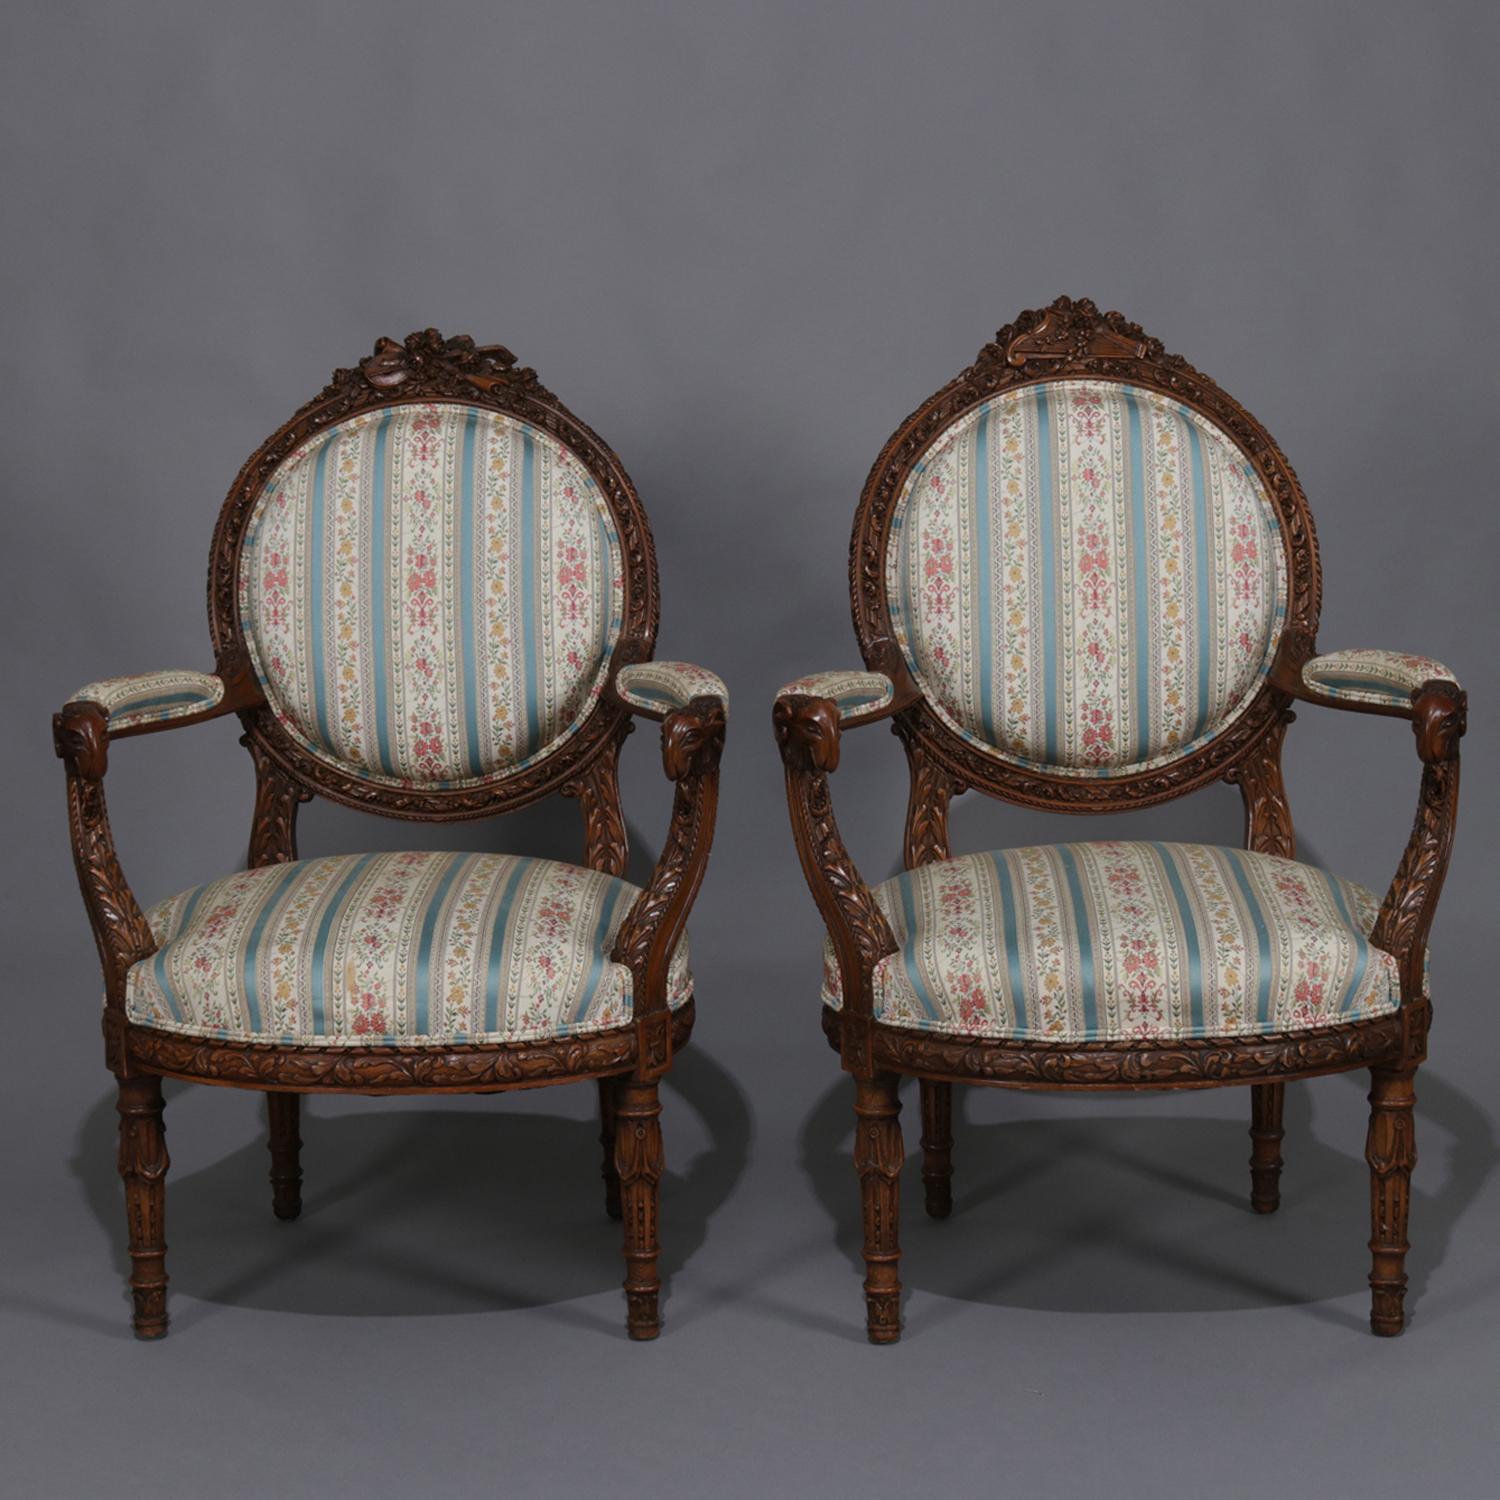 Antique Italian Figural Carved Walnut Upholstered Parlor Set, Doves and Rams 1